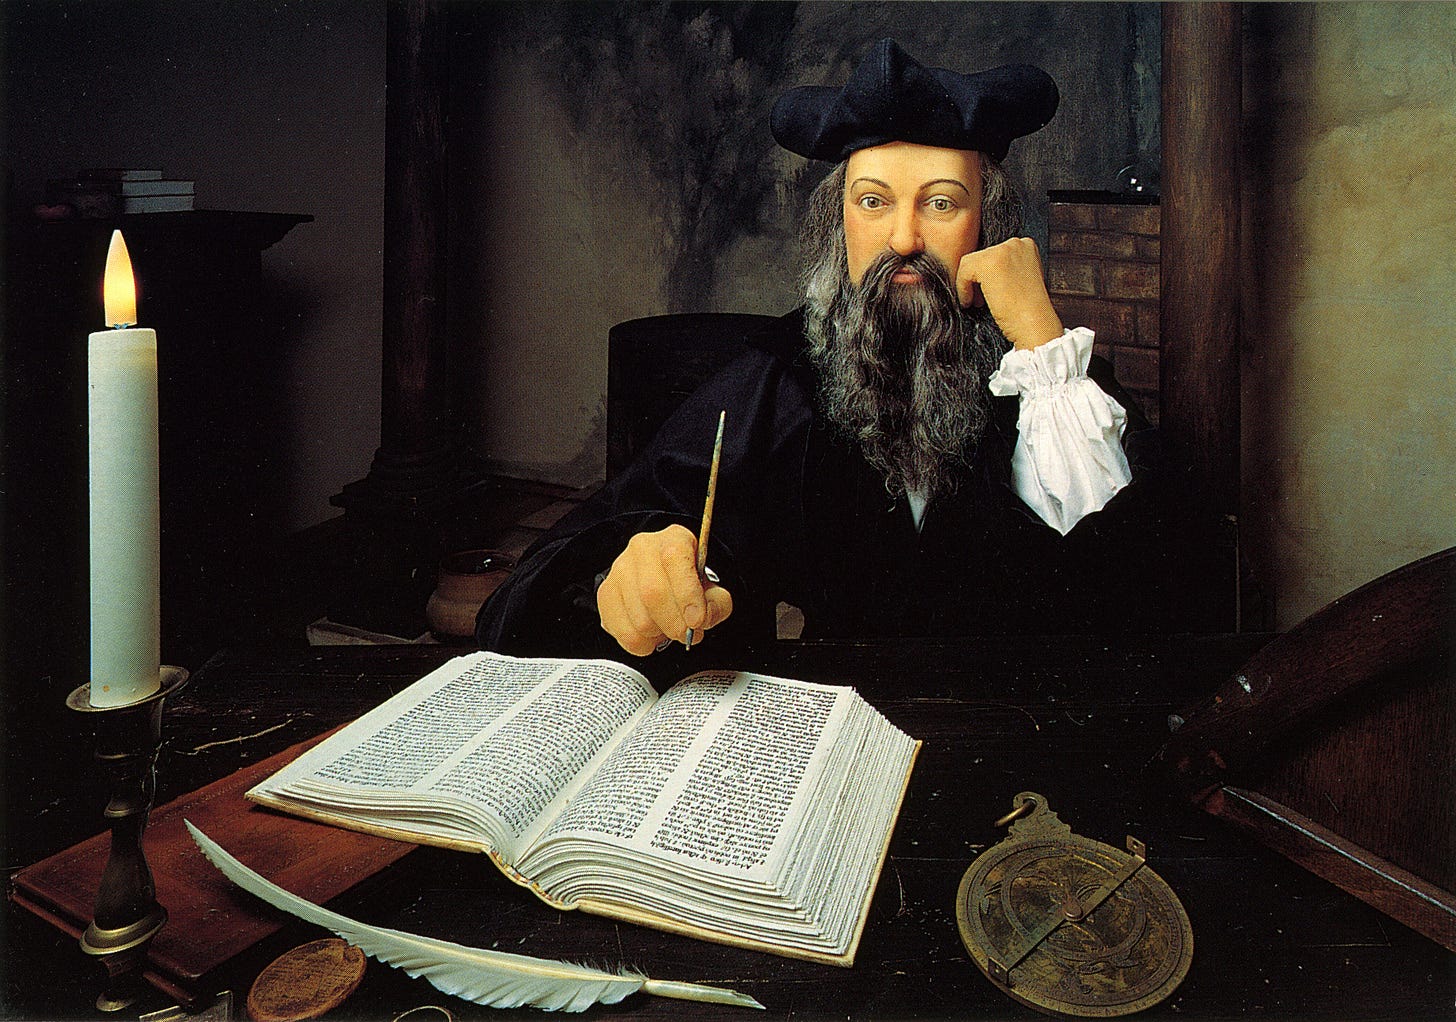 Nostradamus, the French astrologist from the 16th century, details predictions for hundreds of years in the future